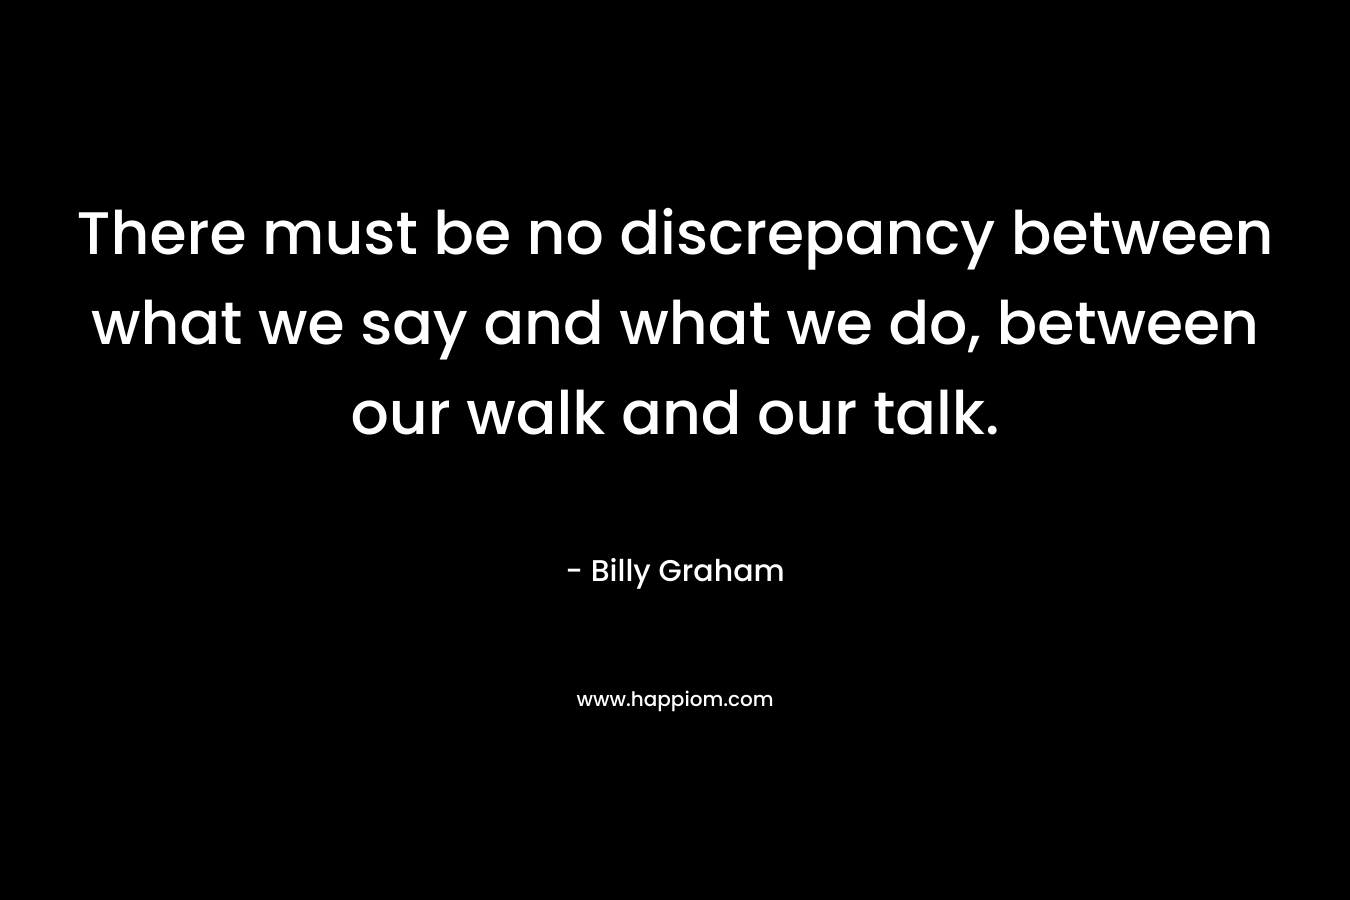 There must be no discrepancy between what we say and what we do, between our walk and our talk.